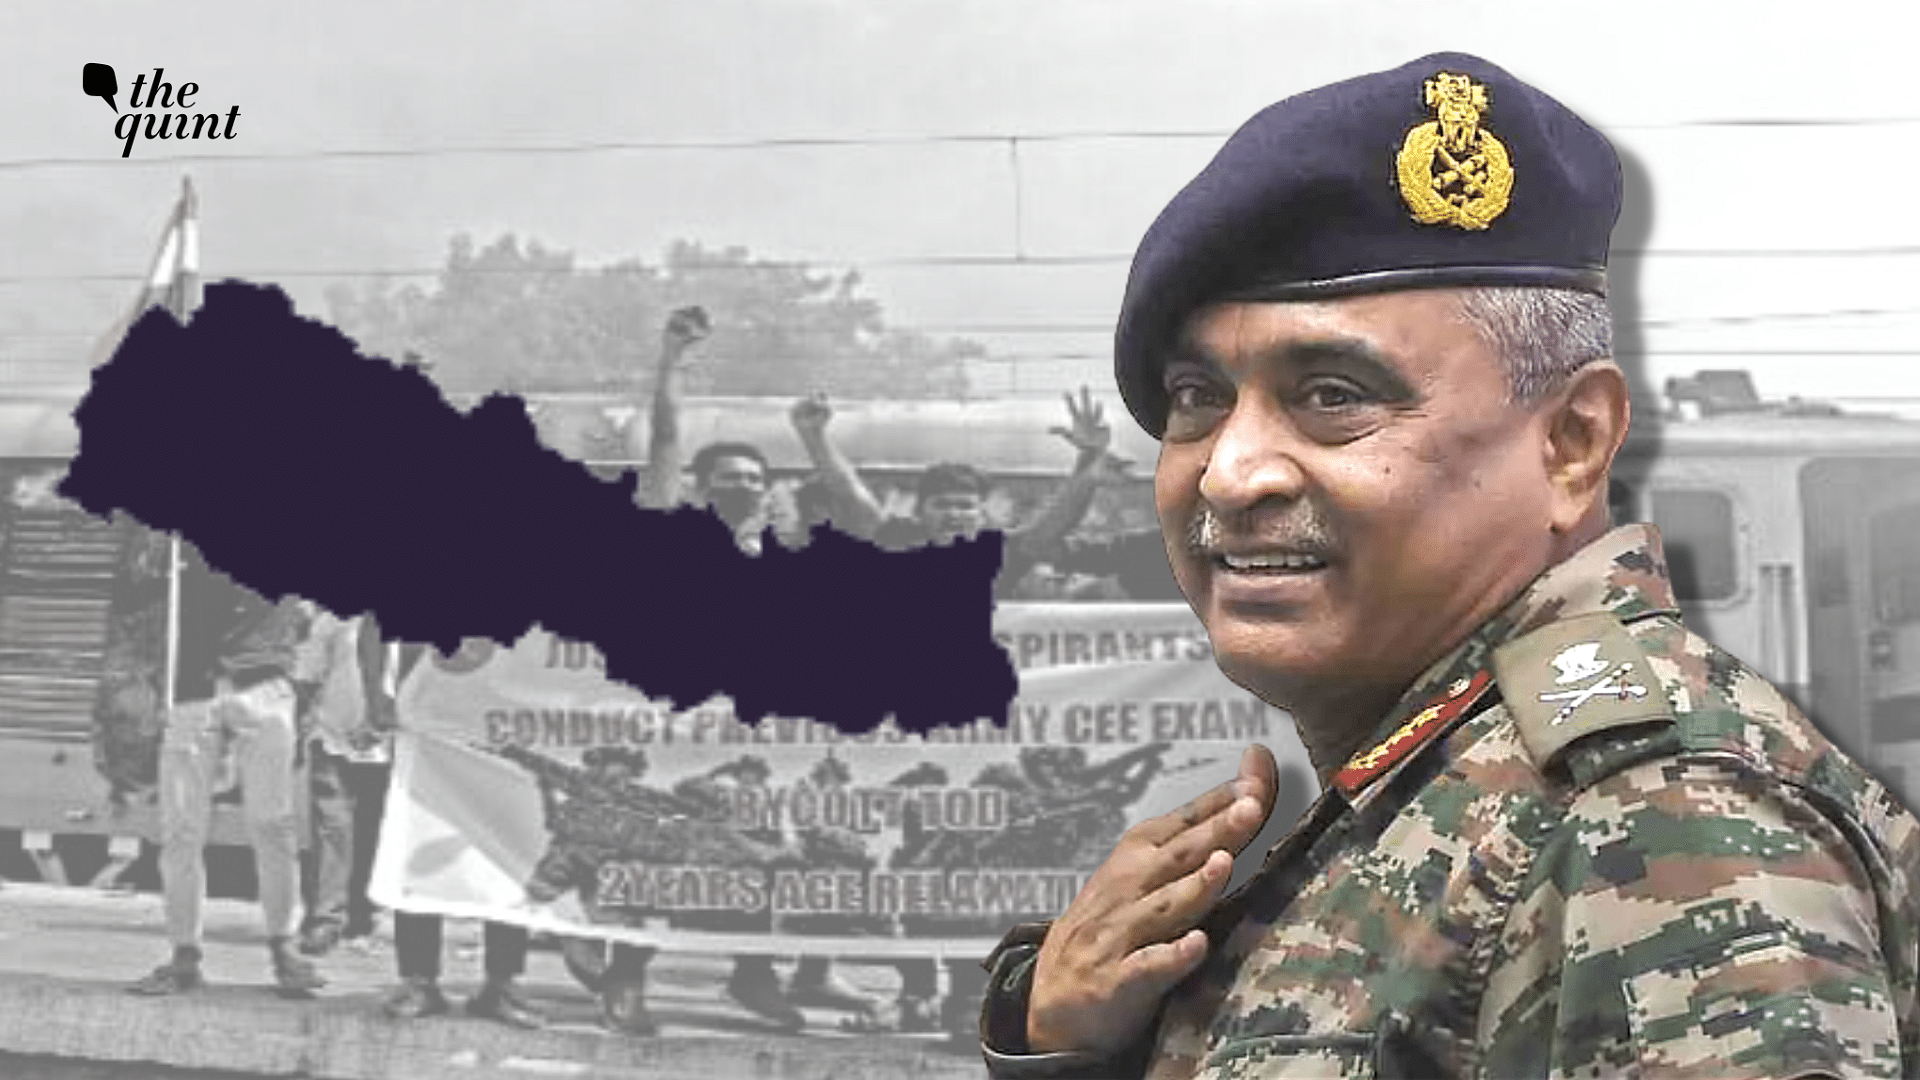 <div class="paragraphs"><p>Indian Army Chief <a href="https://www.thequint.com/news/india/general-manoj-pande-new-indian-army-chief-replaces-mm-naravane-guard-of-honour">General Manoj Pande</a> is visiting Nepal for five days from 4 September. It is mainly to receive the title of honorary general of Nepal Army from the president of Nepal, as it is customary between the two armies of India and Nepal to bestow this title on the chiefs of the two countries.</p></div>